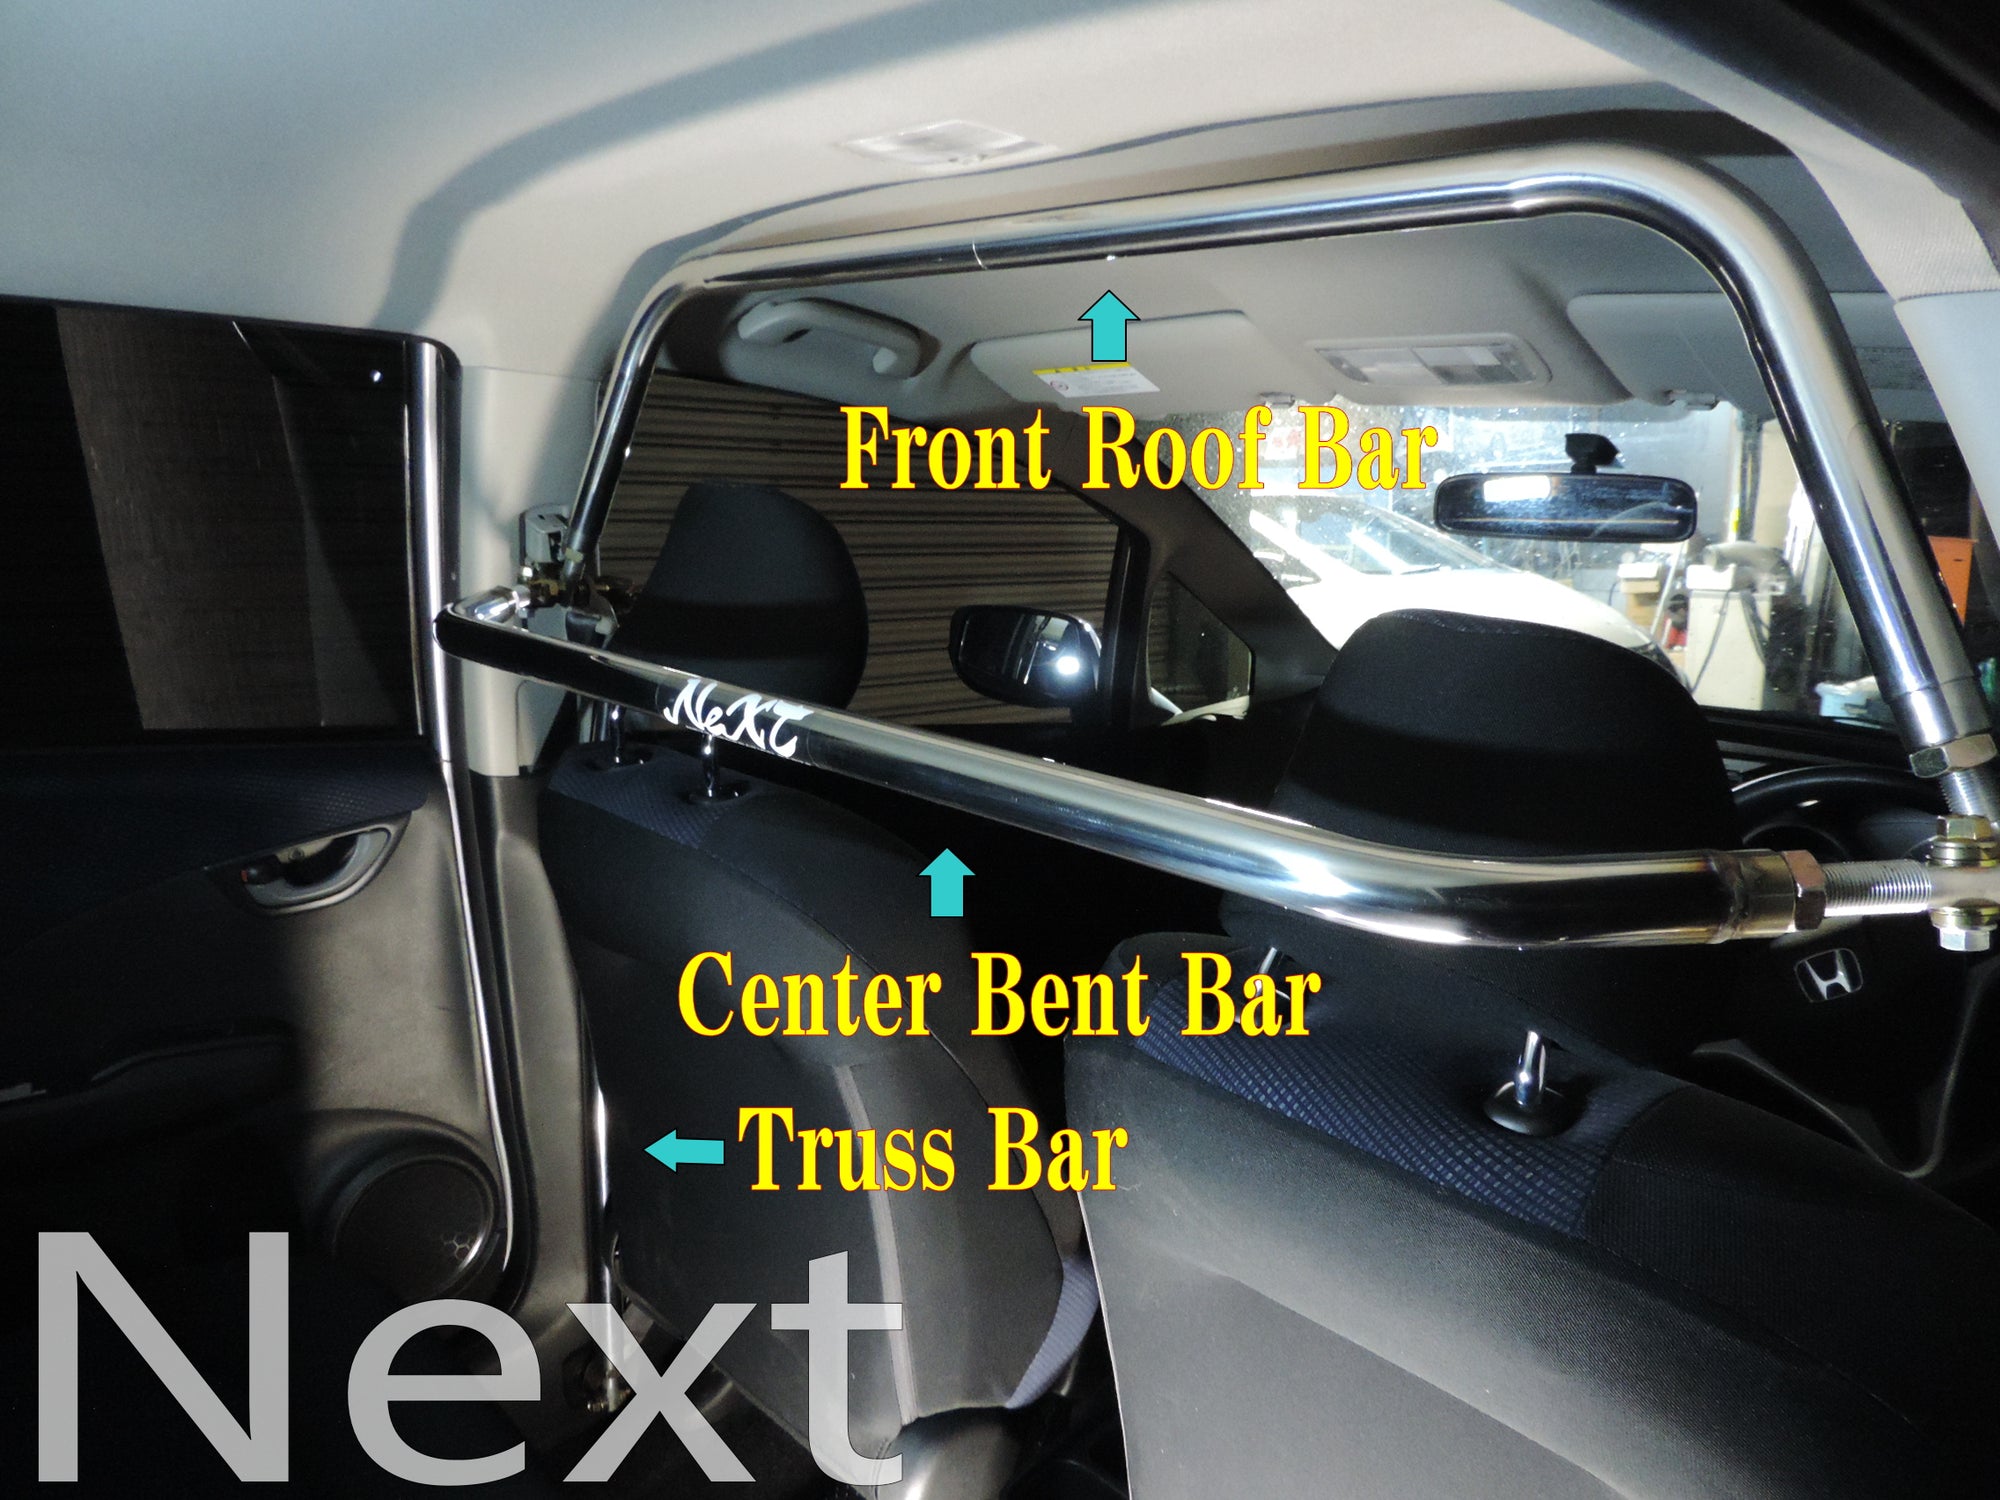 NEXT MIRACLE CROSS BAR FRONT ROOF BAR STAINLESS 32 FOR SUBARU IMPREZA GC8 T F NEXT-01609